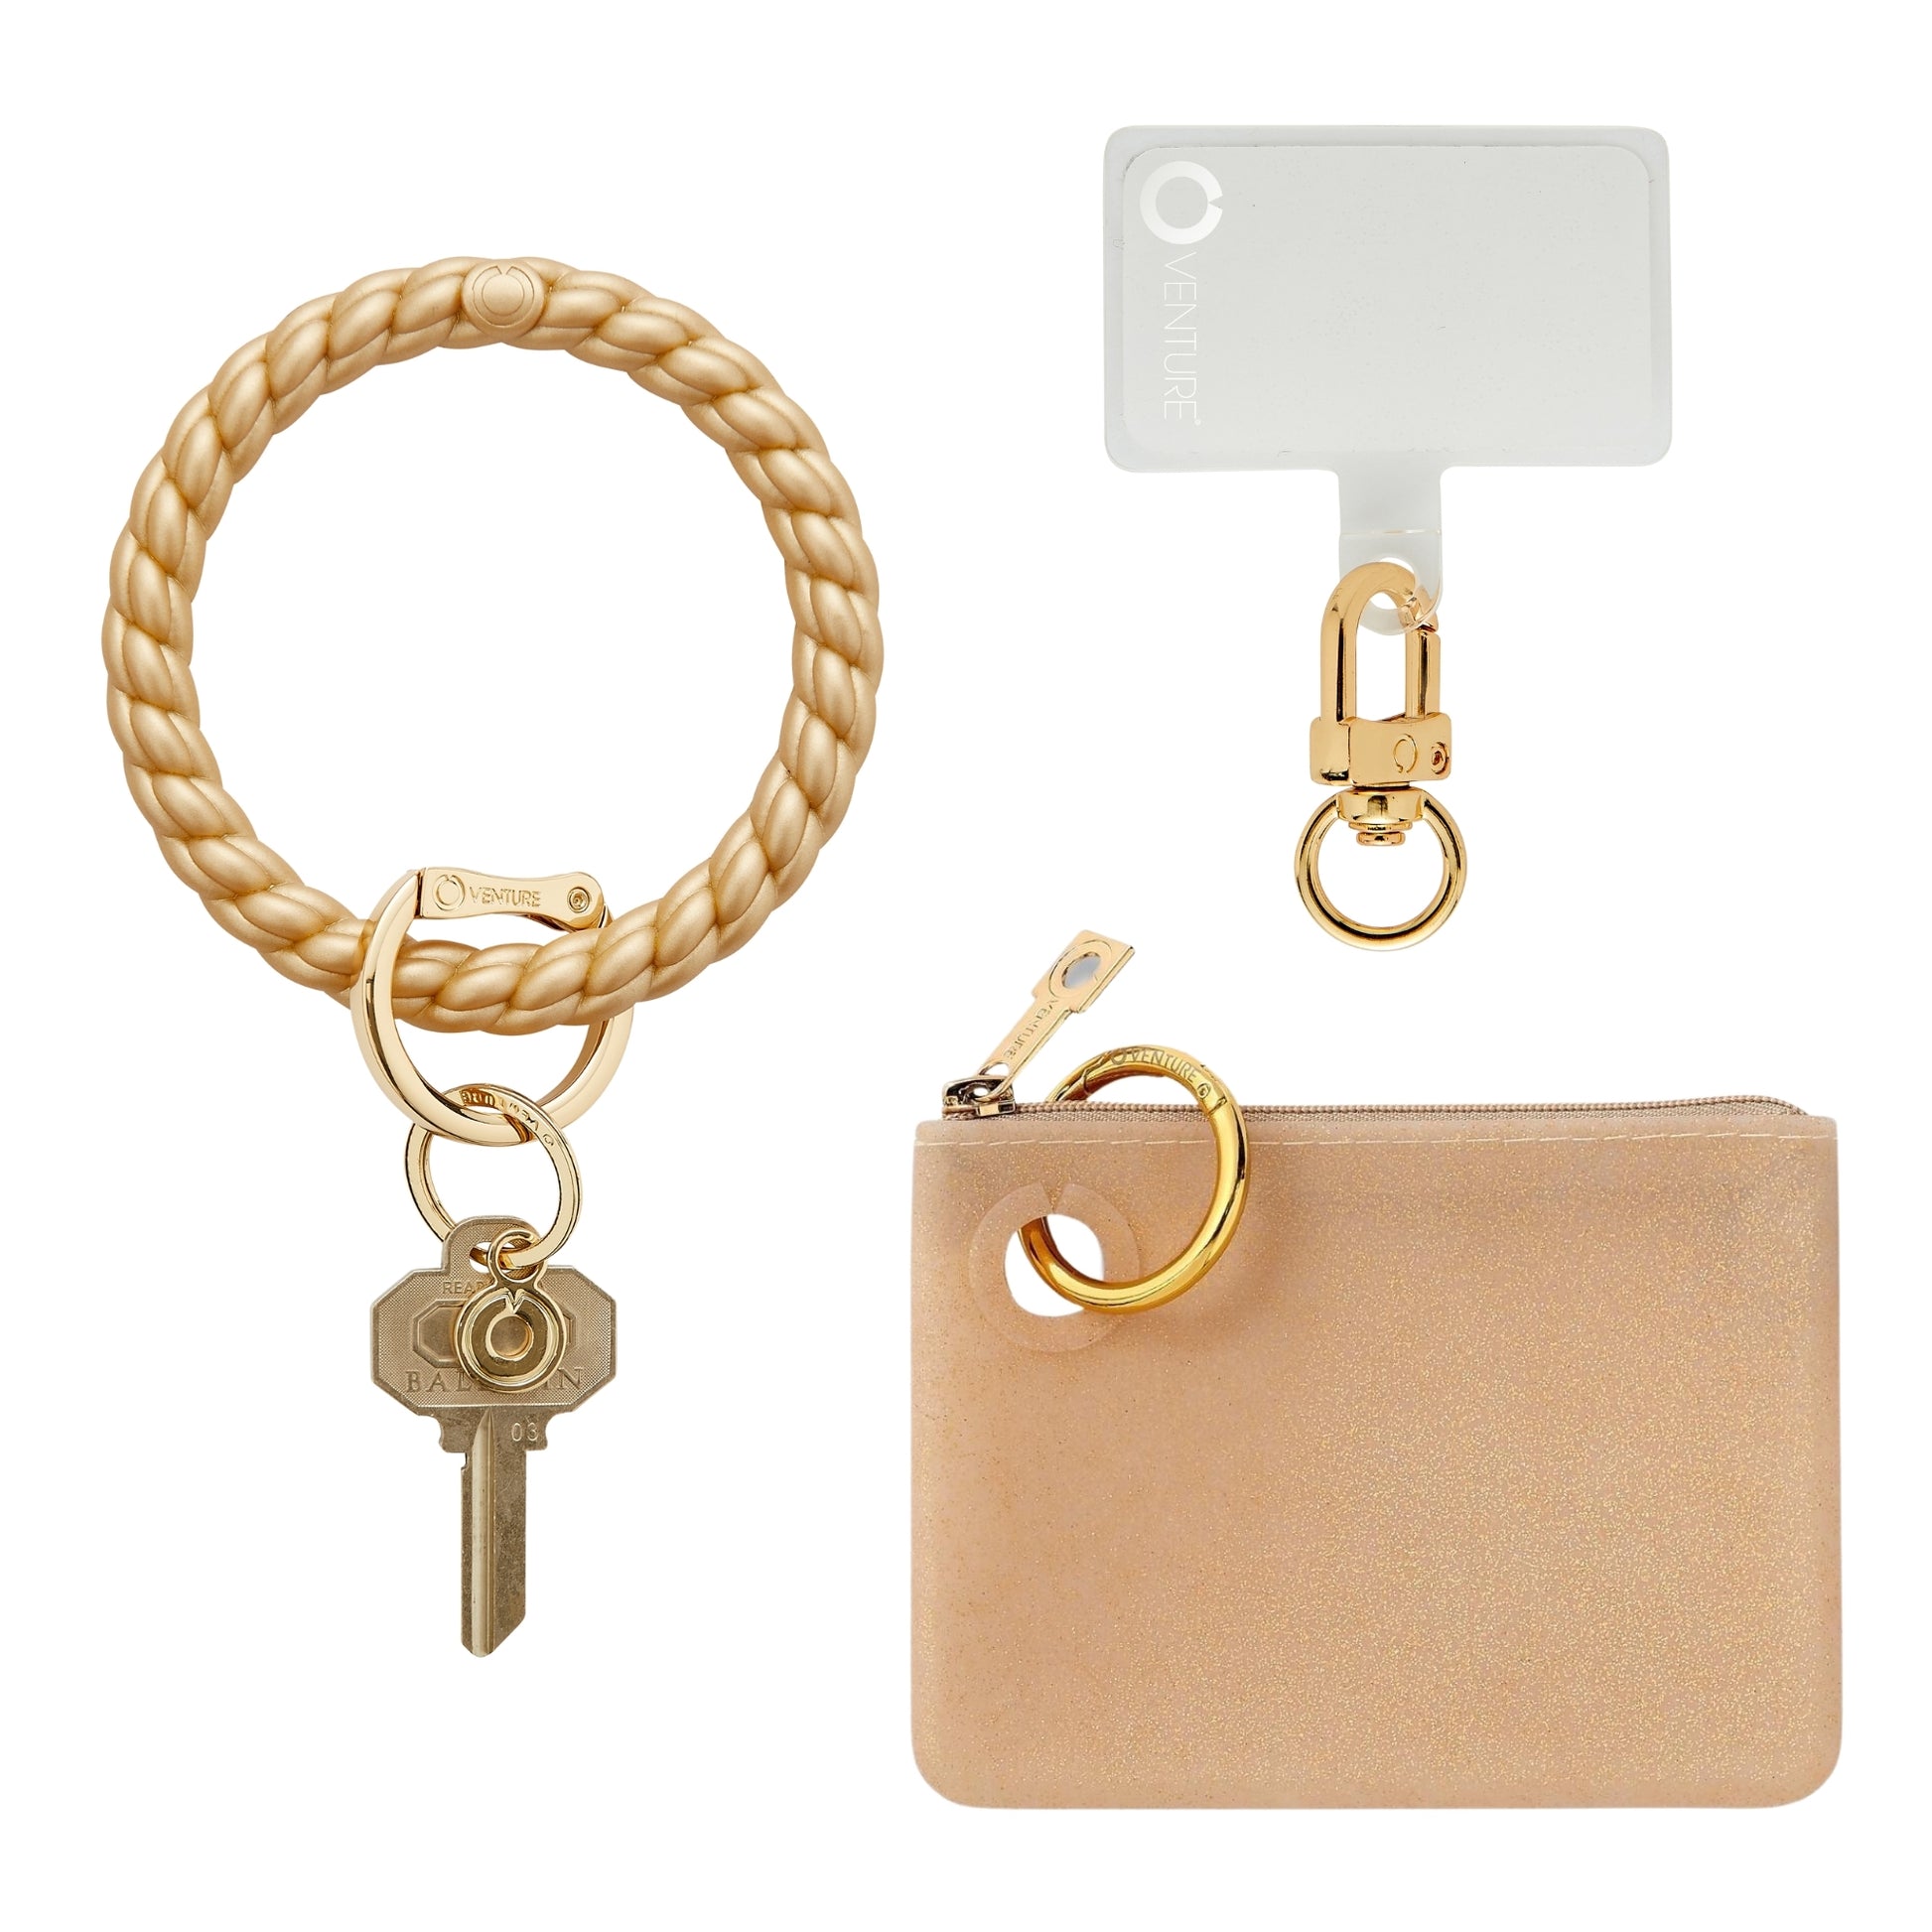 Oventure braided three in one set with Big O Keyring, mini silicone pouch and phone connector in gold